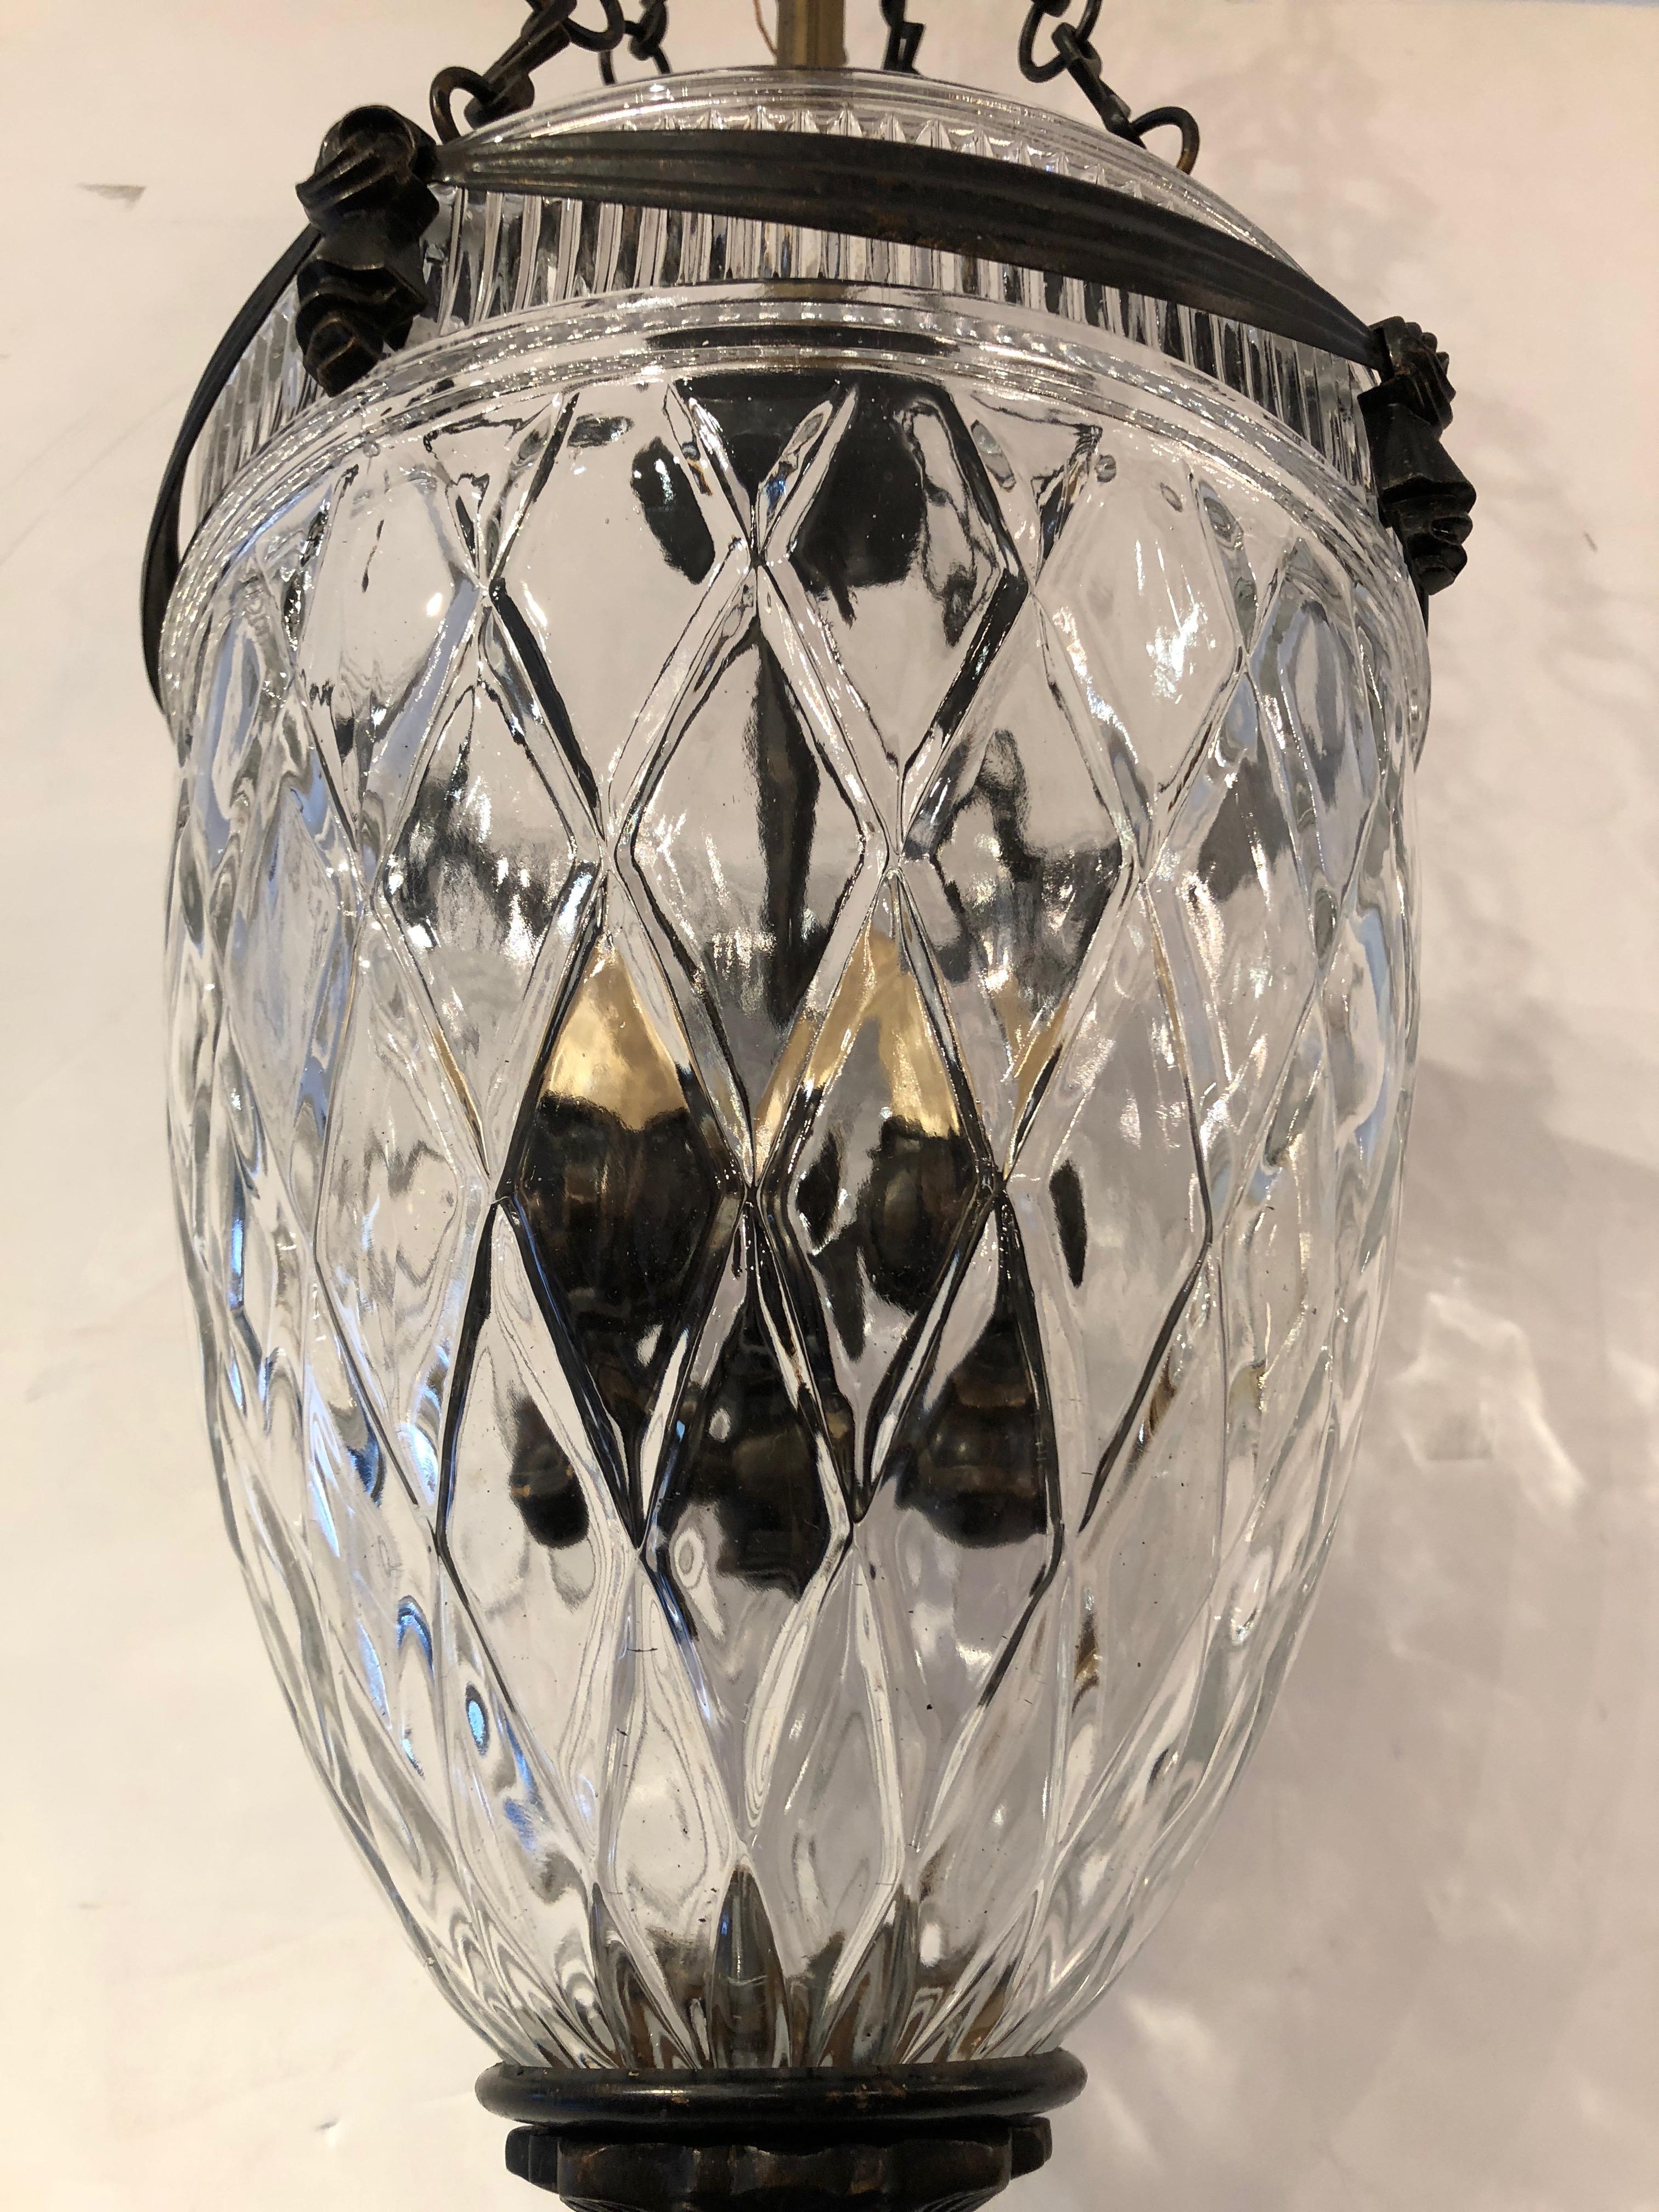 Beautiful lantern pendant having heavy pressed glass dome adorned with bronze colored brass swags and pine cone finial. Great for a hallway or small foyer.